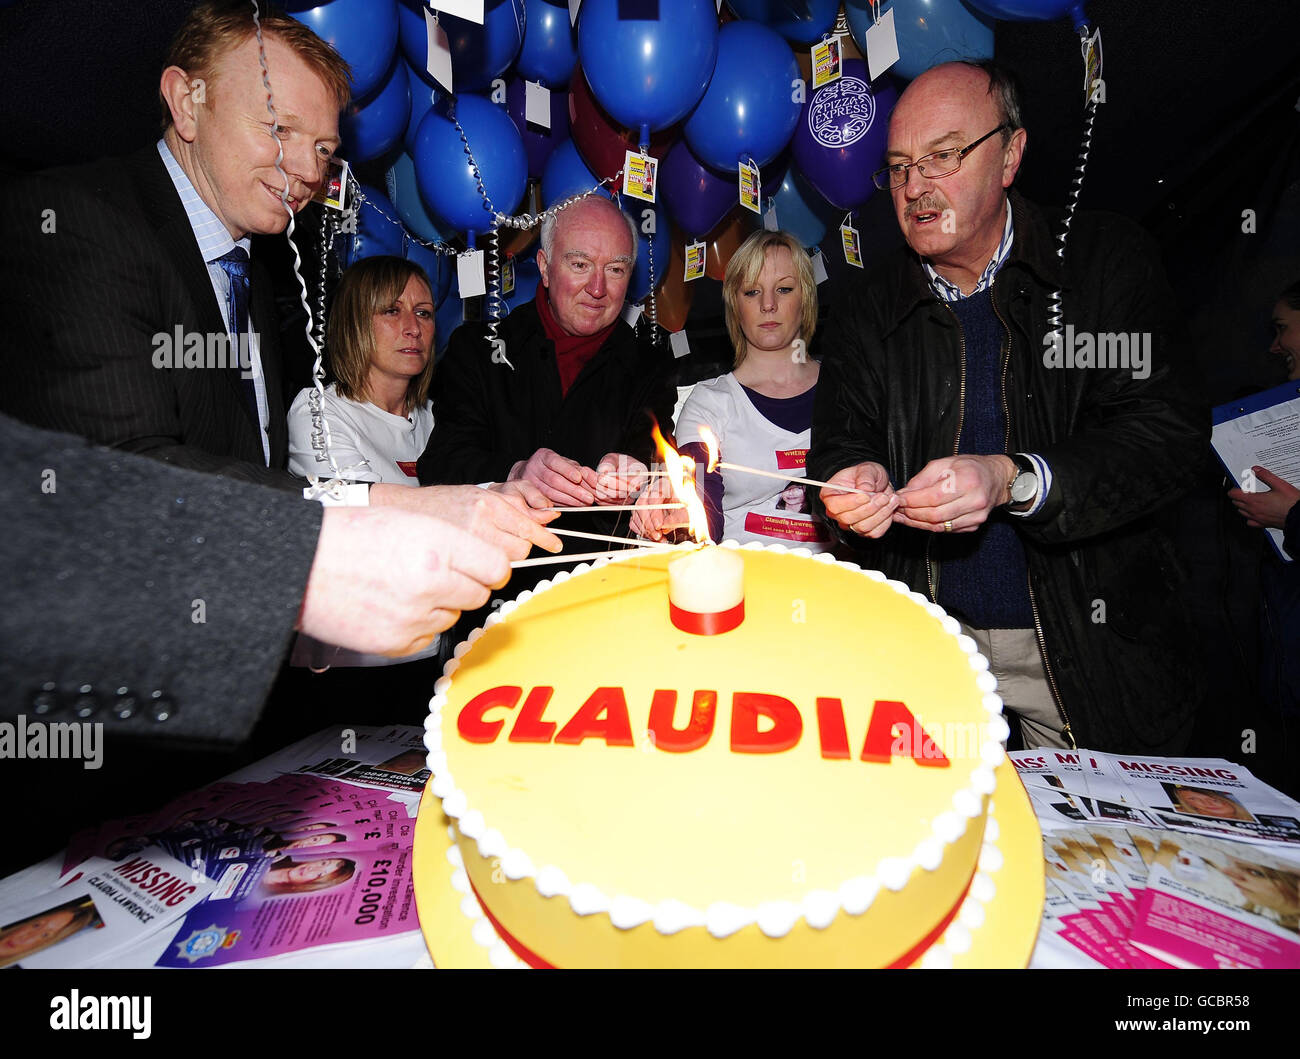 (left to right) Det. Supt. Ray Galloway, Suzy Cooper, Peter Lawrence, Jen King and Martin Dales. The father of missing York chef Claudia Lawrence lights a candle on her birthday cake in York today, on the eve of her 36th birthday. He is joined by her friends, the Police Officer in charge of the investigation, and supporters of the Claudia Lawrence Awareness Day. Stock Photo